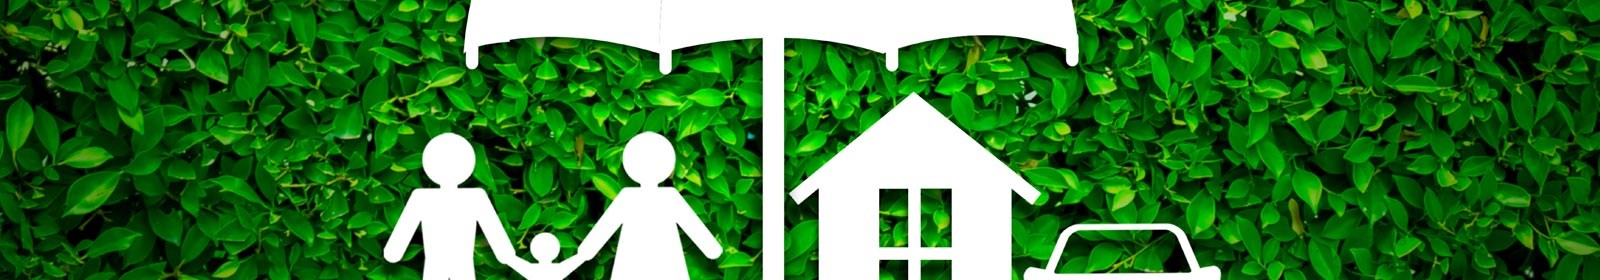 Lean and green with renewable energy solutions – but are you adequately insured?